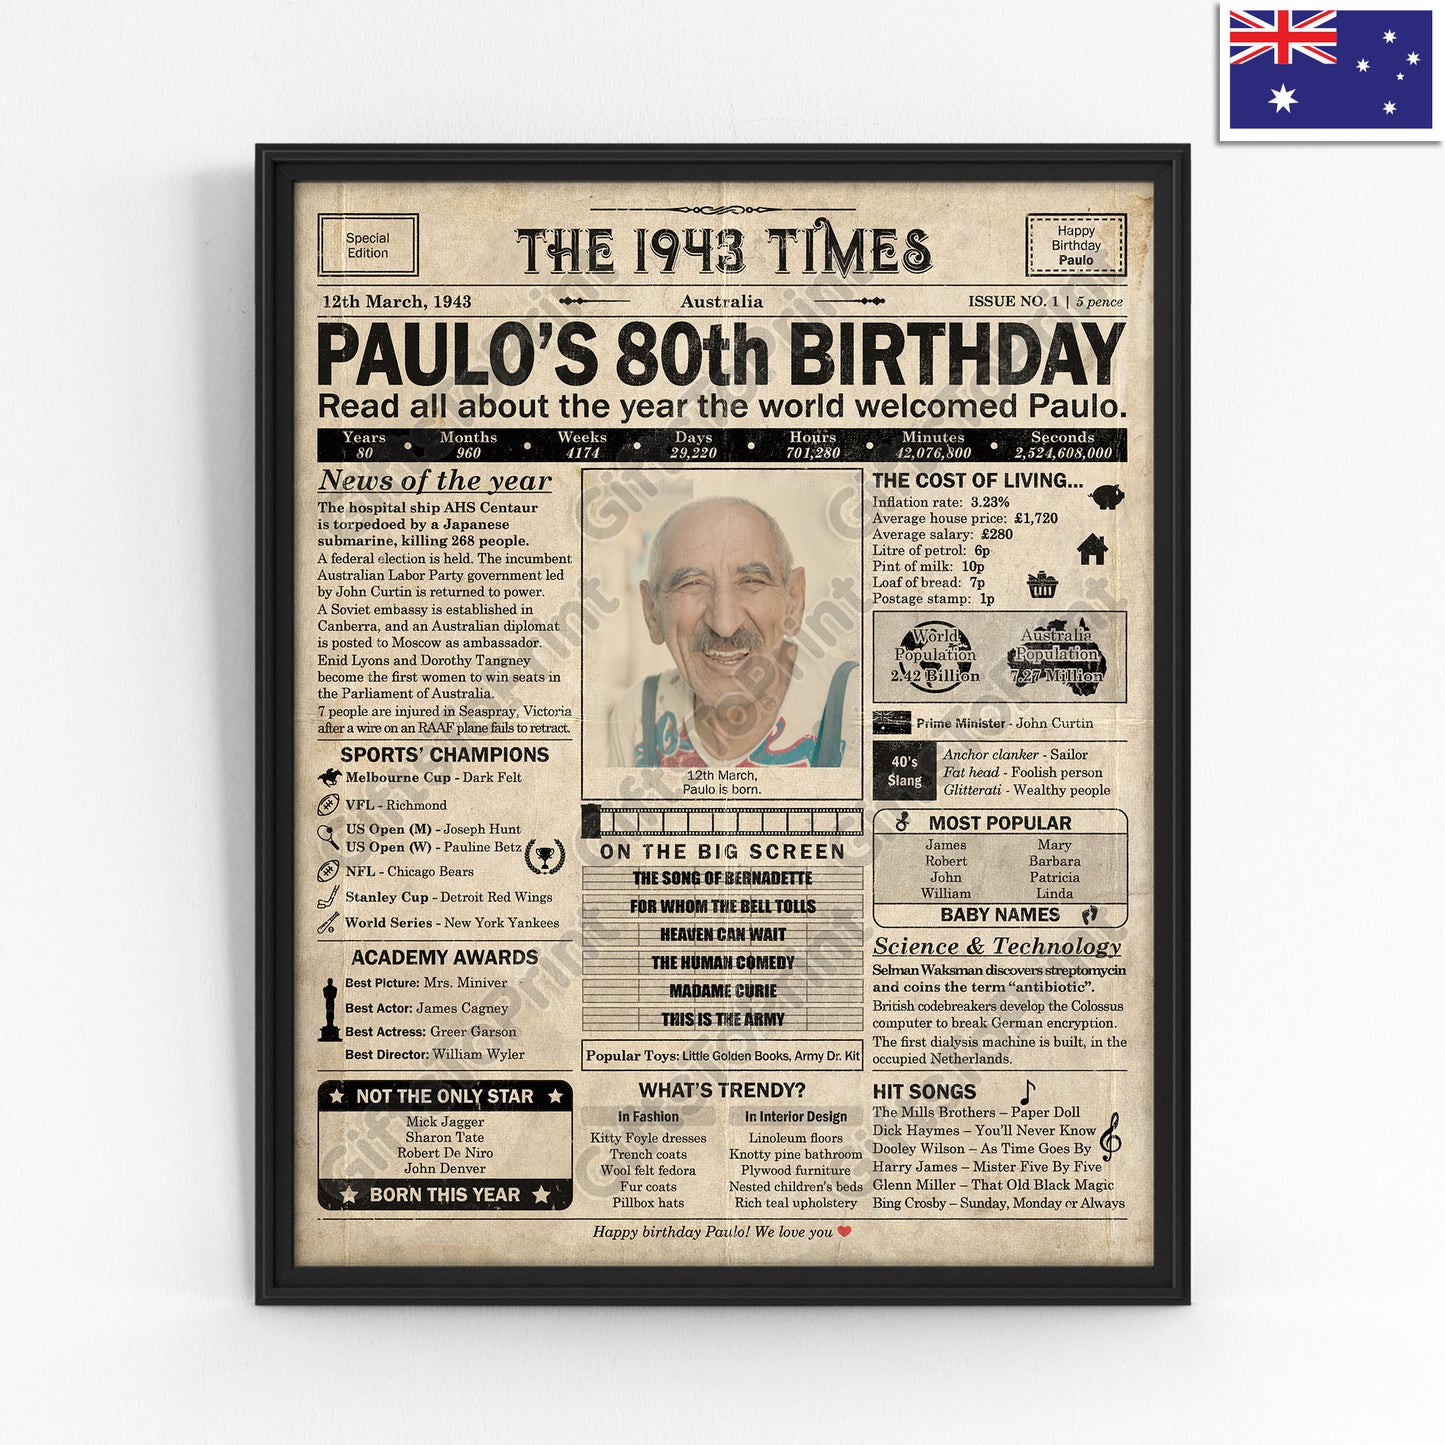 Personalised 80th Birthday Gift: A Printable AUSTRALIAN Birthday Poster of 1943